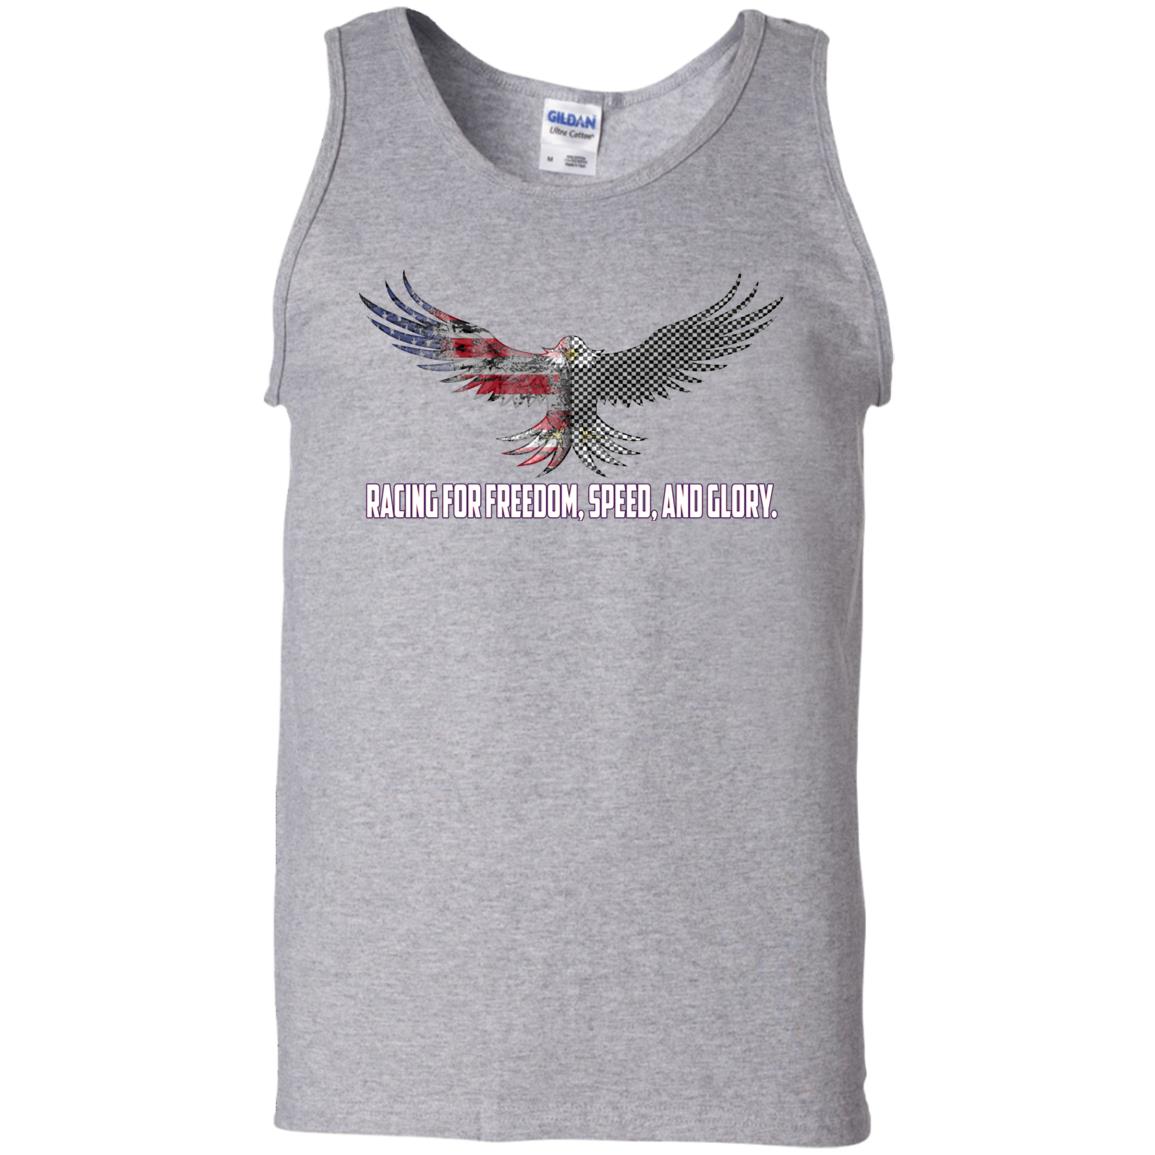 Racing For Freedom, Speed, And Glory 100% Cotton Tank Top